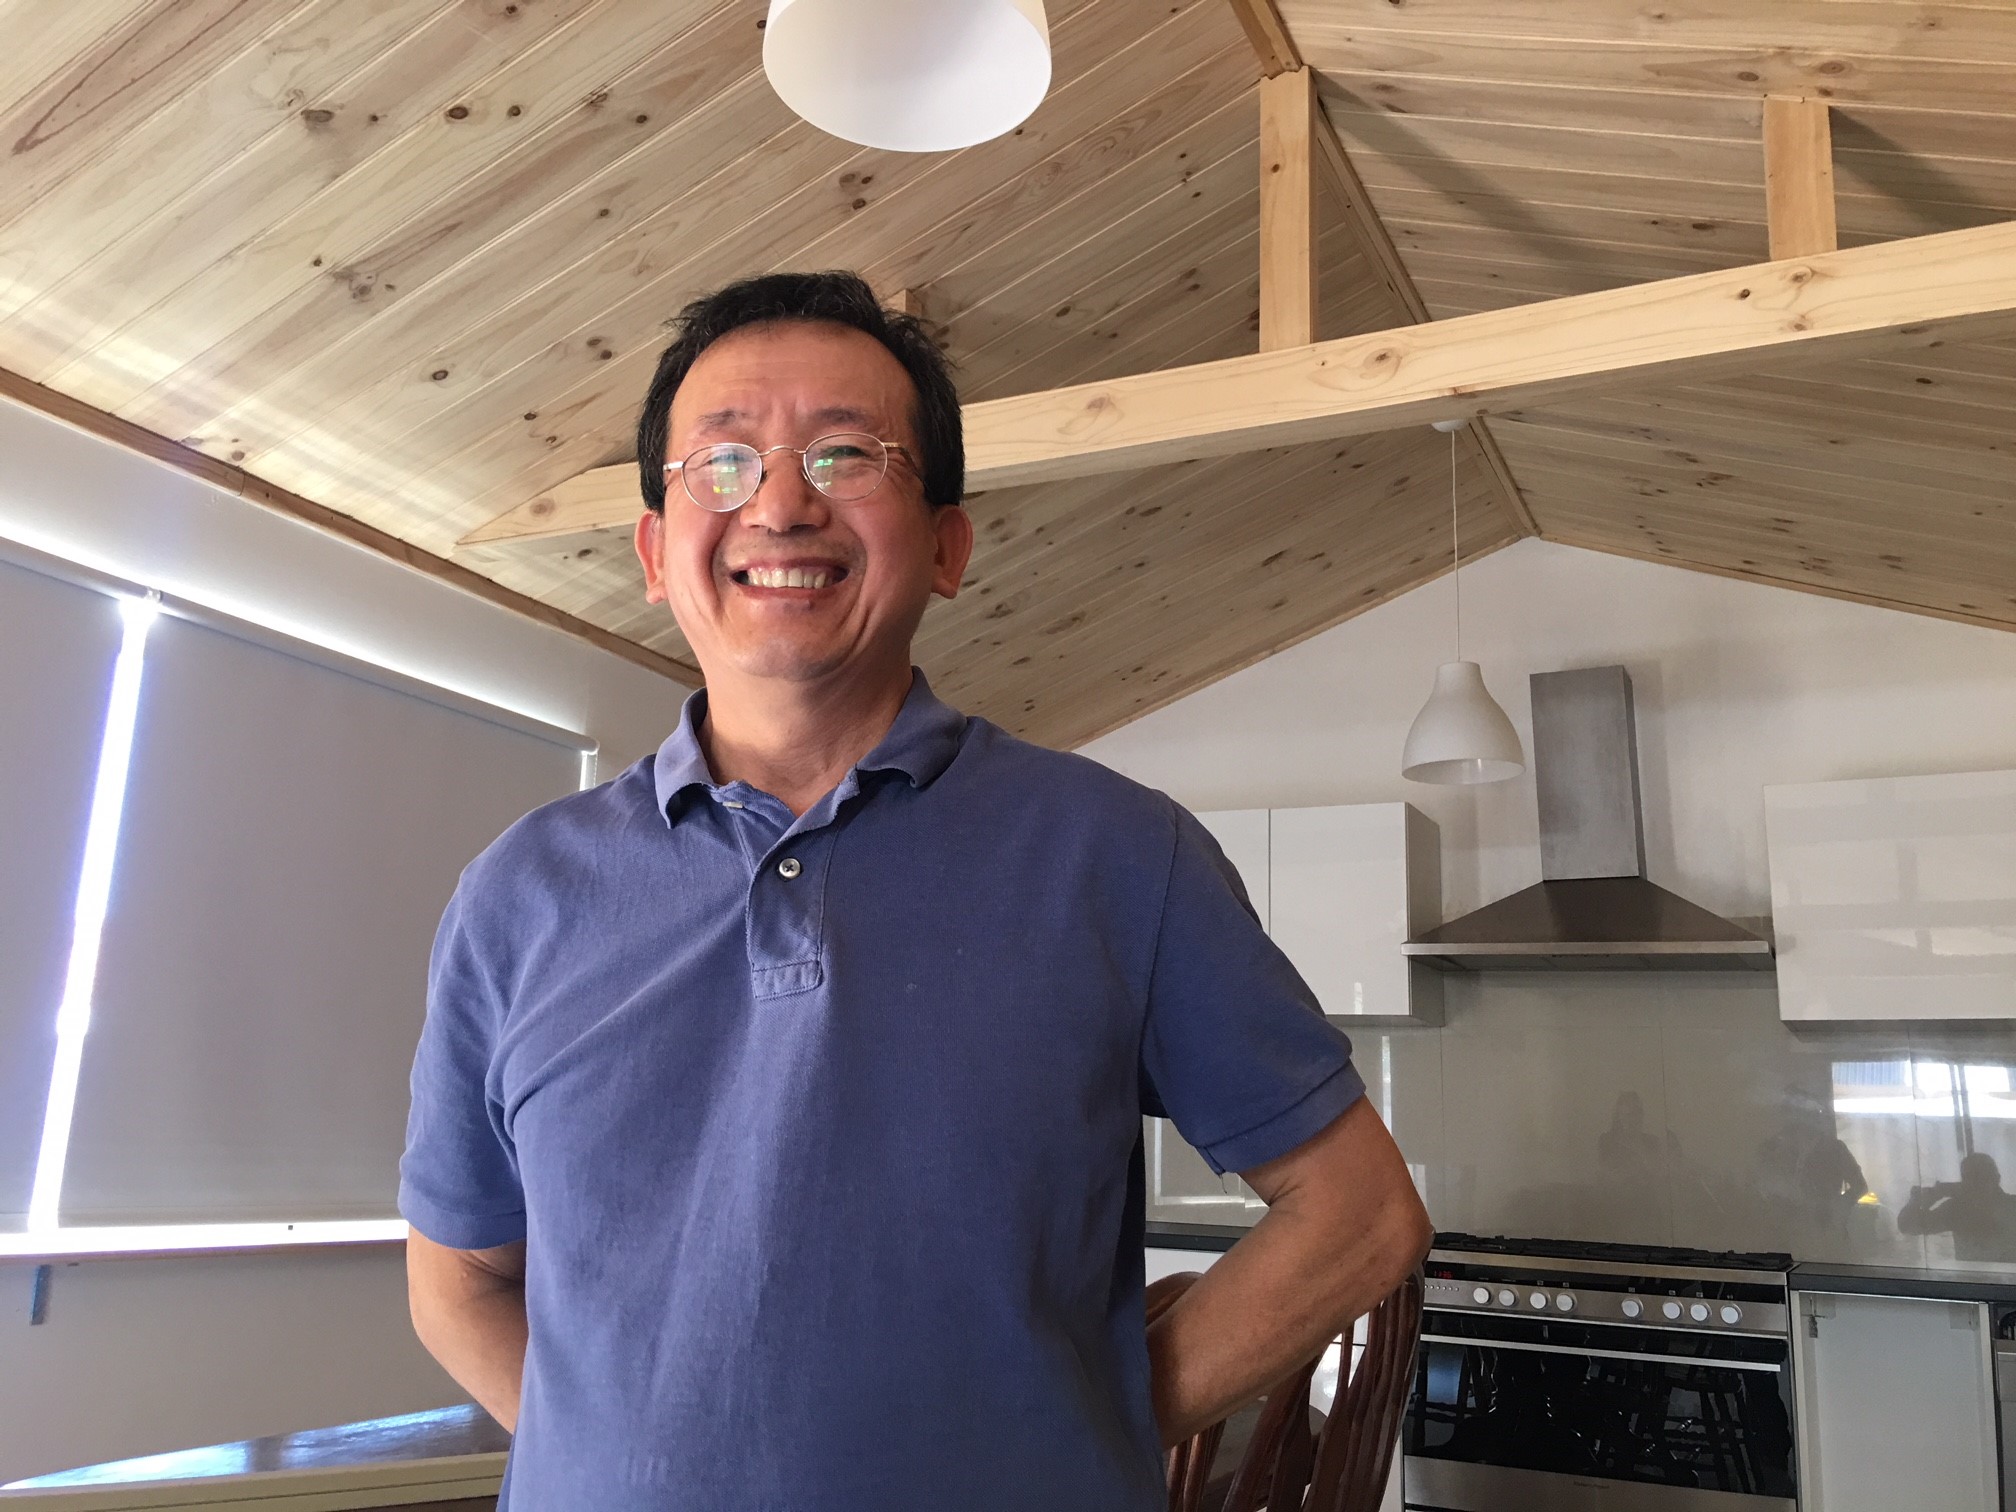 Dr Ba Huynh Pham smiling at his timber-lined ceiling in a room in his home